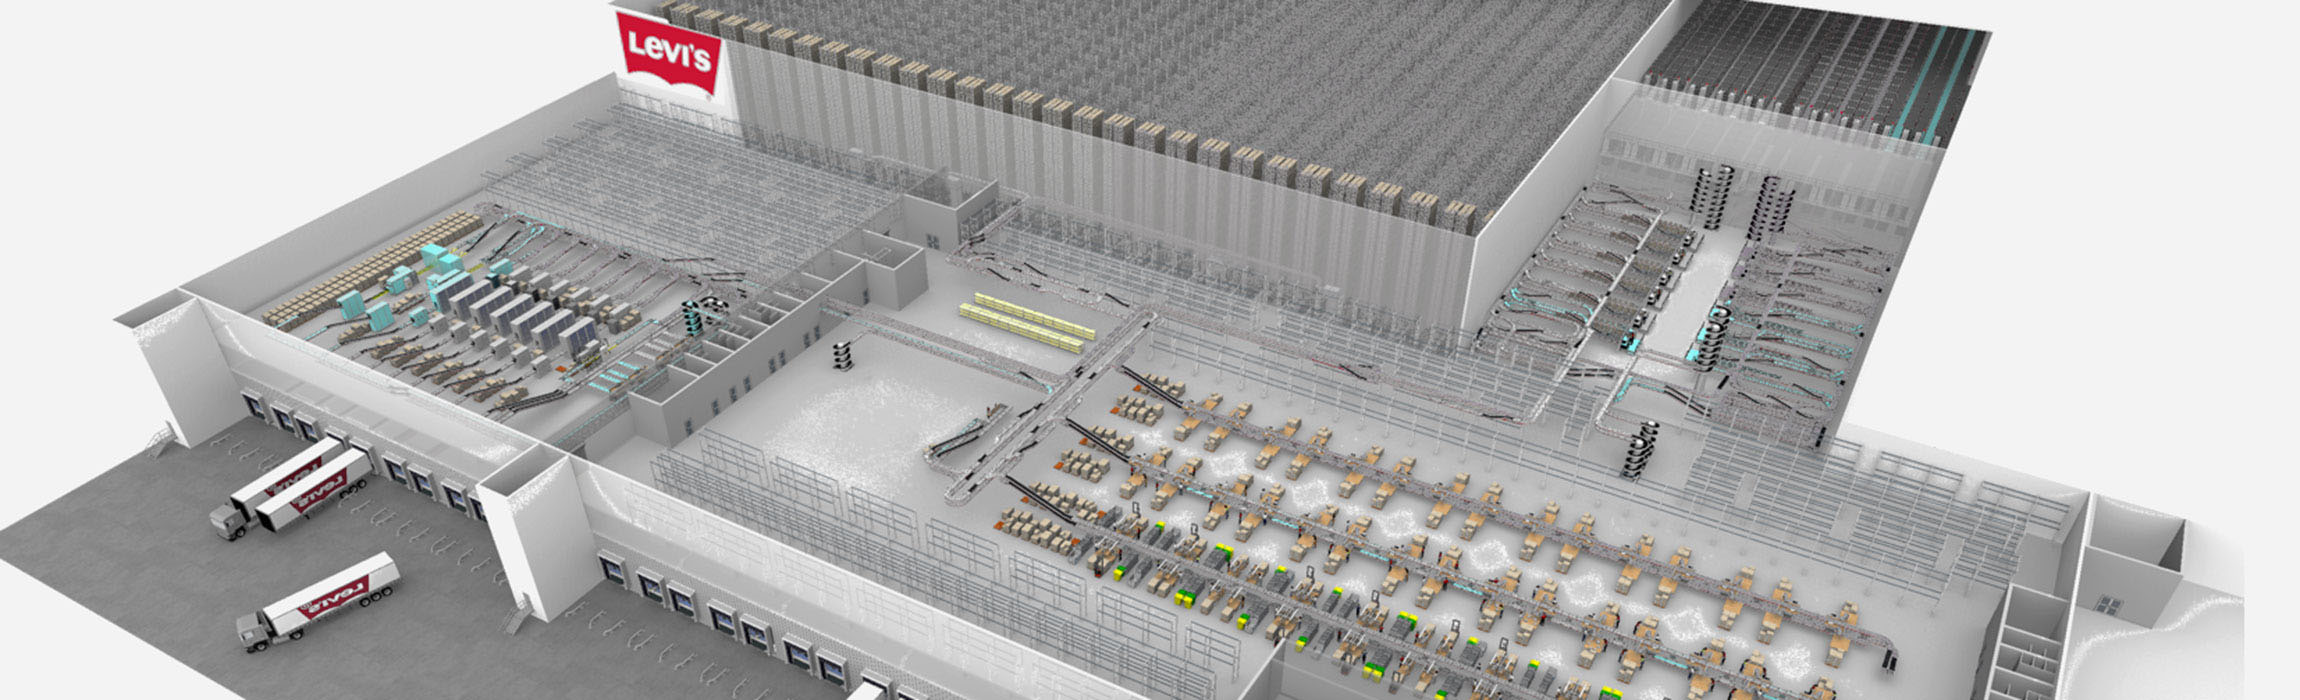 Levi Strauss & Co. is building one of the largest logistics hubs in Europe with TGW.